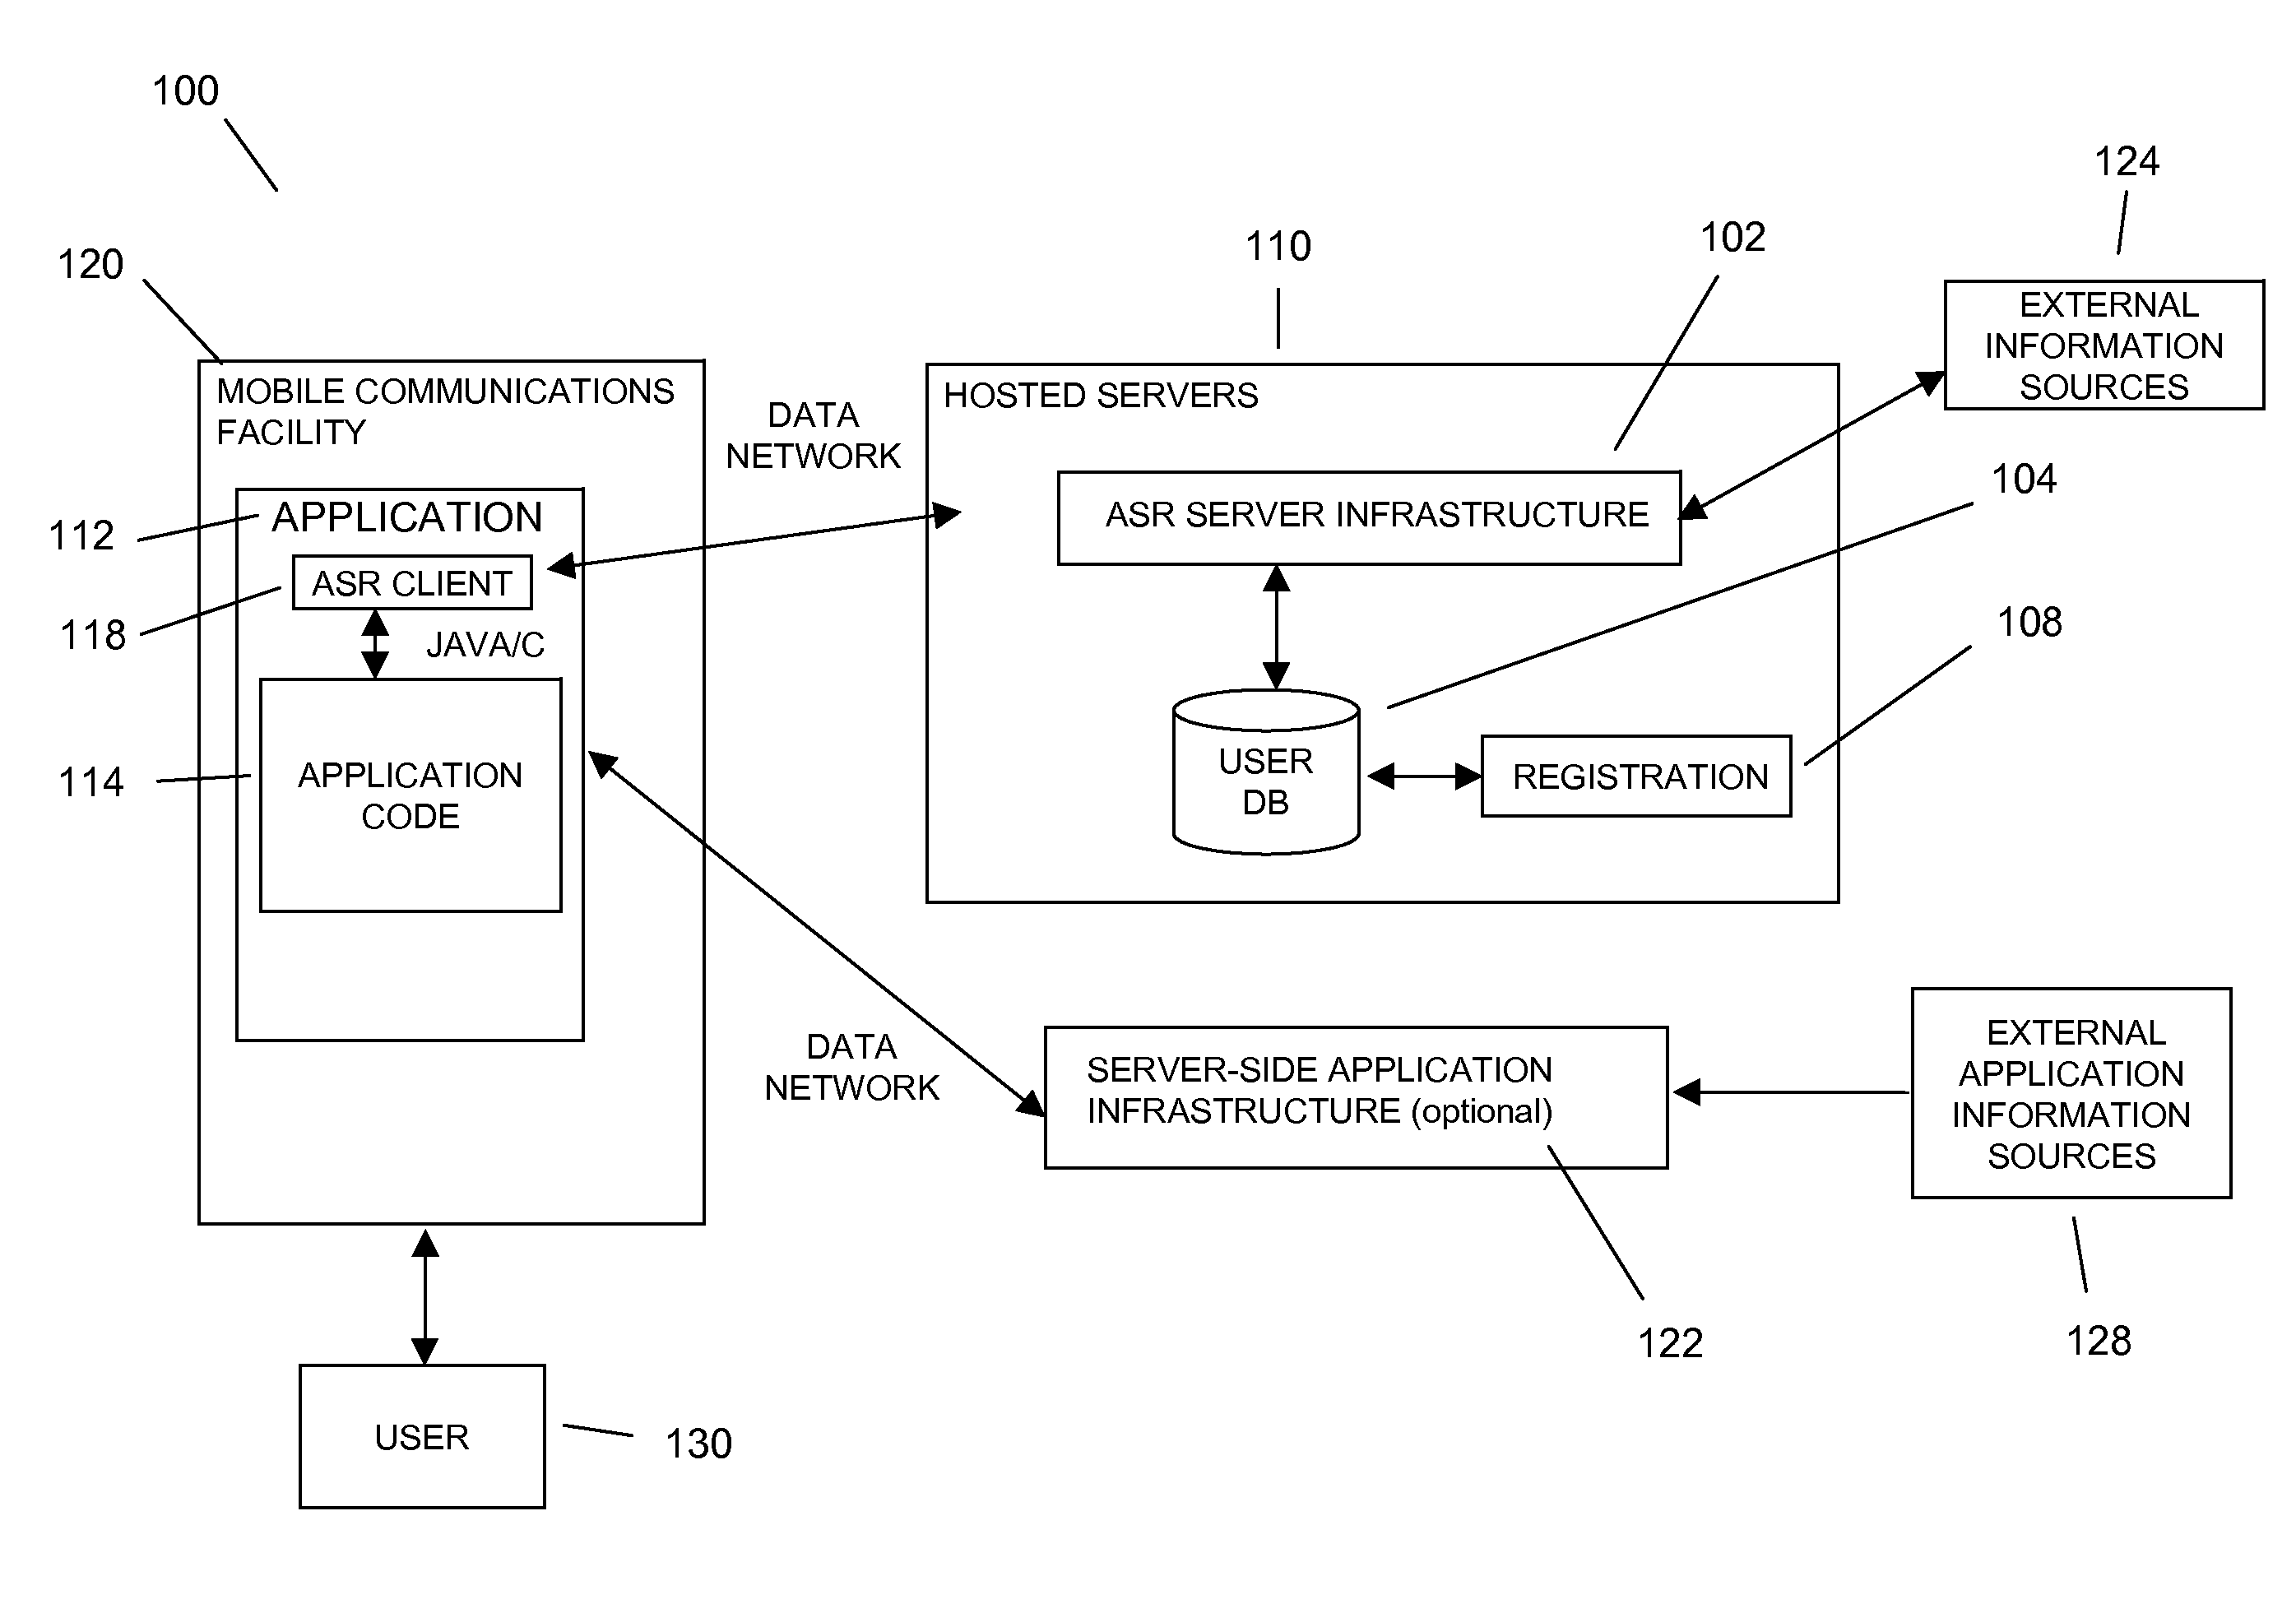 Speech recognition through the collection of contact information in mobile dictation application